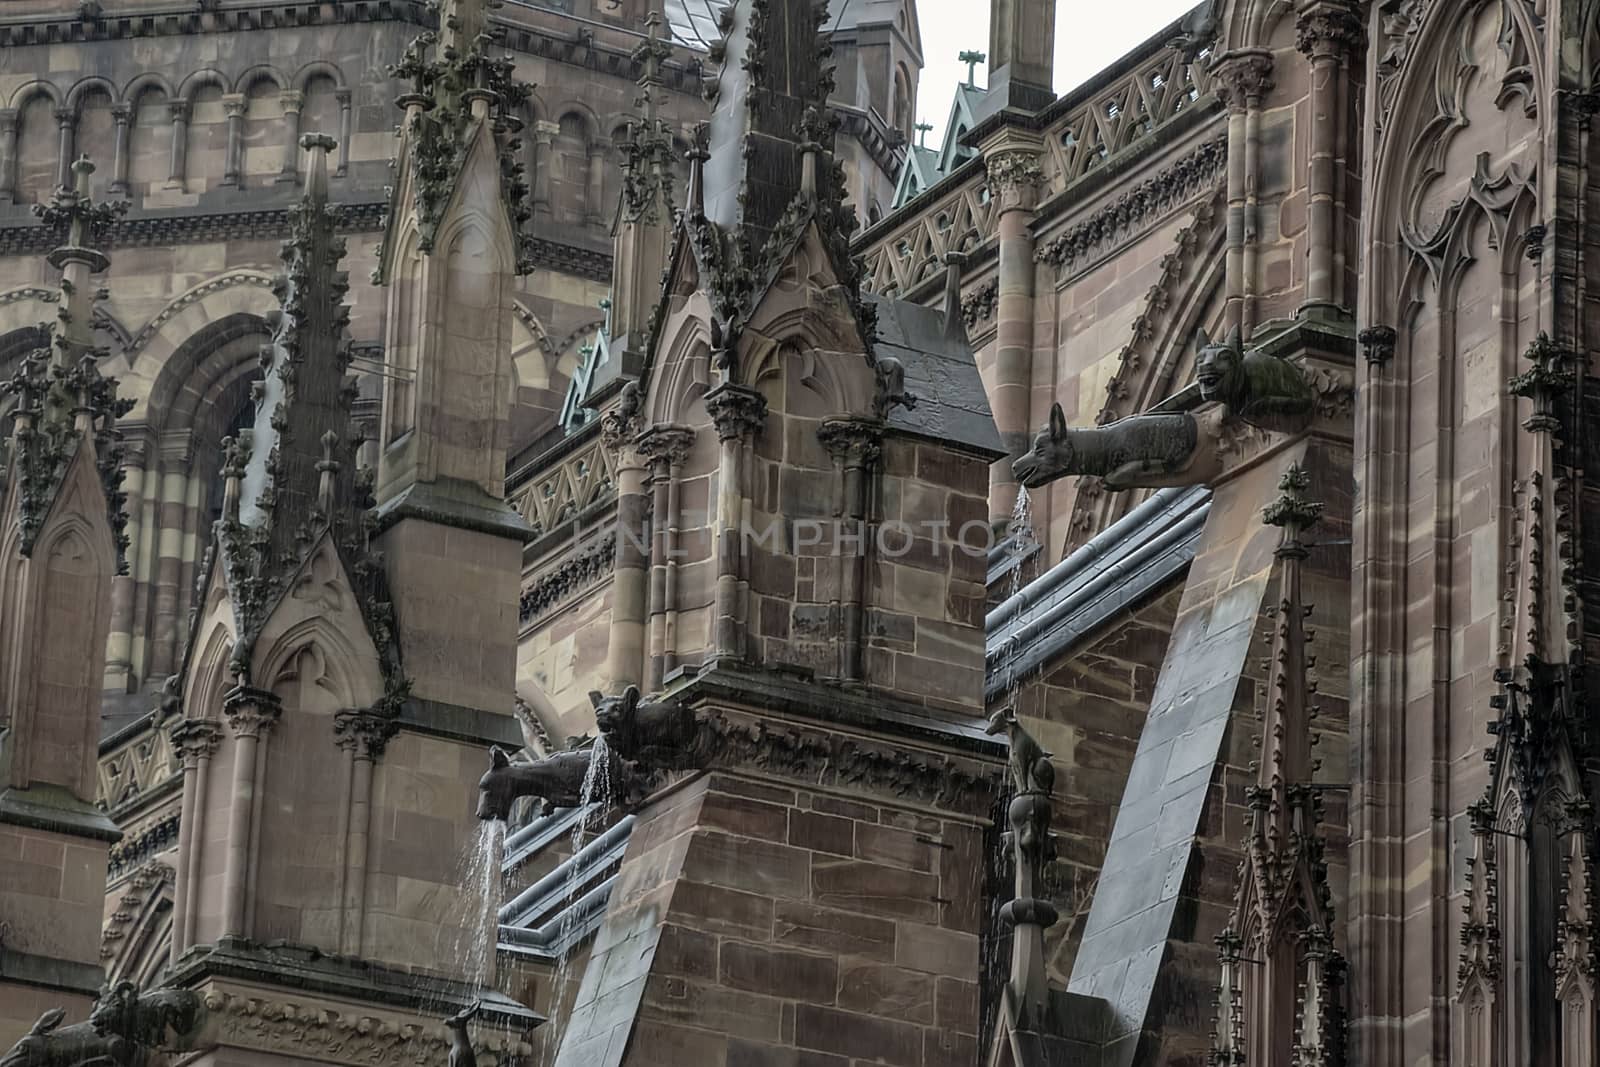 France, Alsace, June 2015: Spires of Strasbourg cathedral in heavy rain